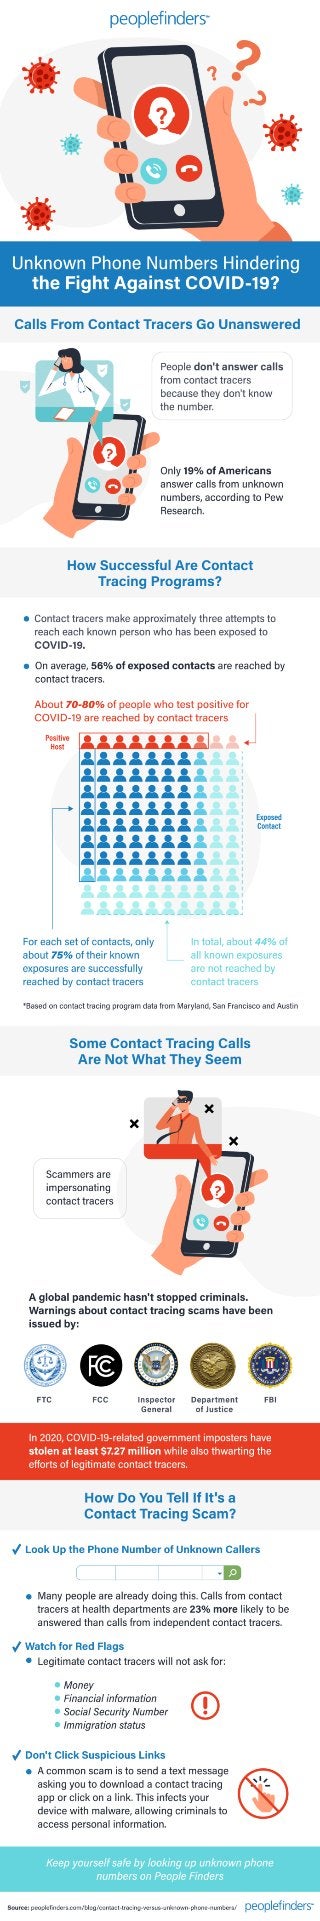 Contact Tracing Versus Unknown Phone Numbers